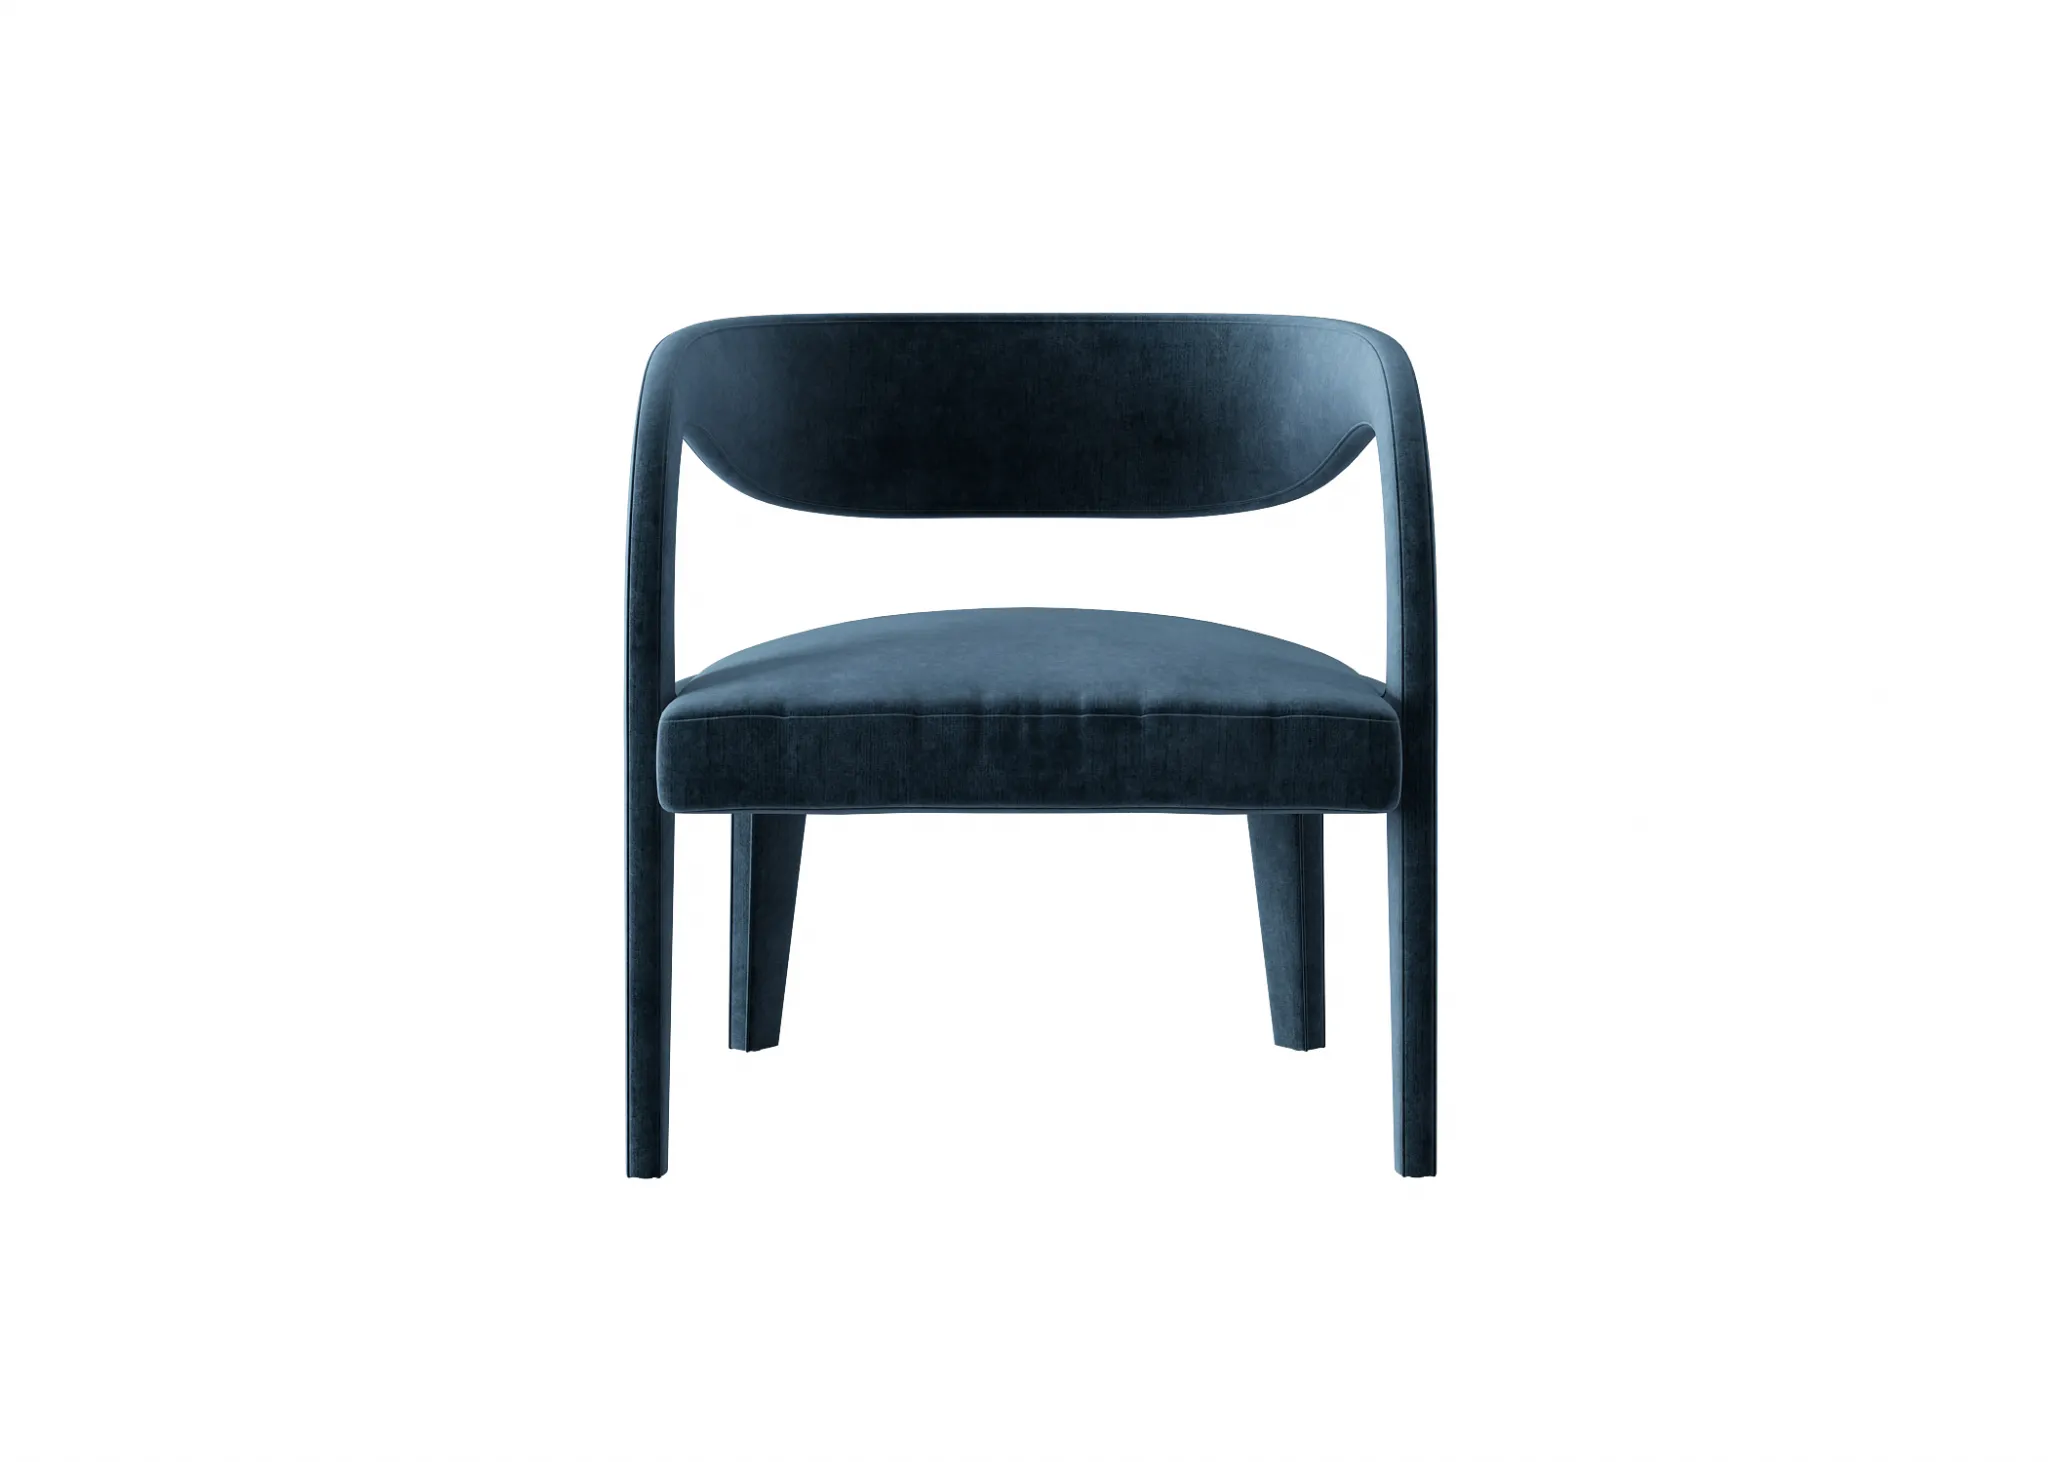 FURNITURE 3D MODELS – CHAIRS – 0375